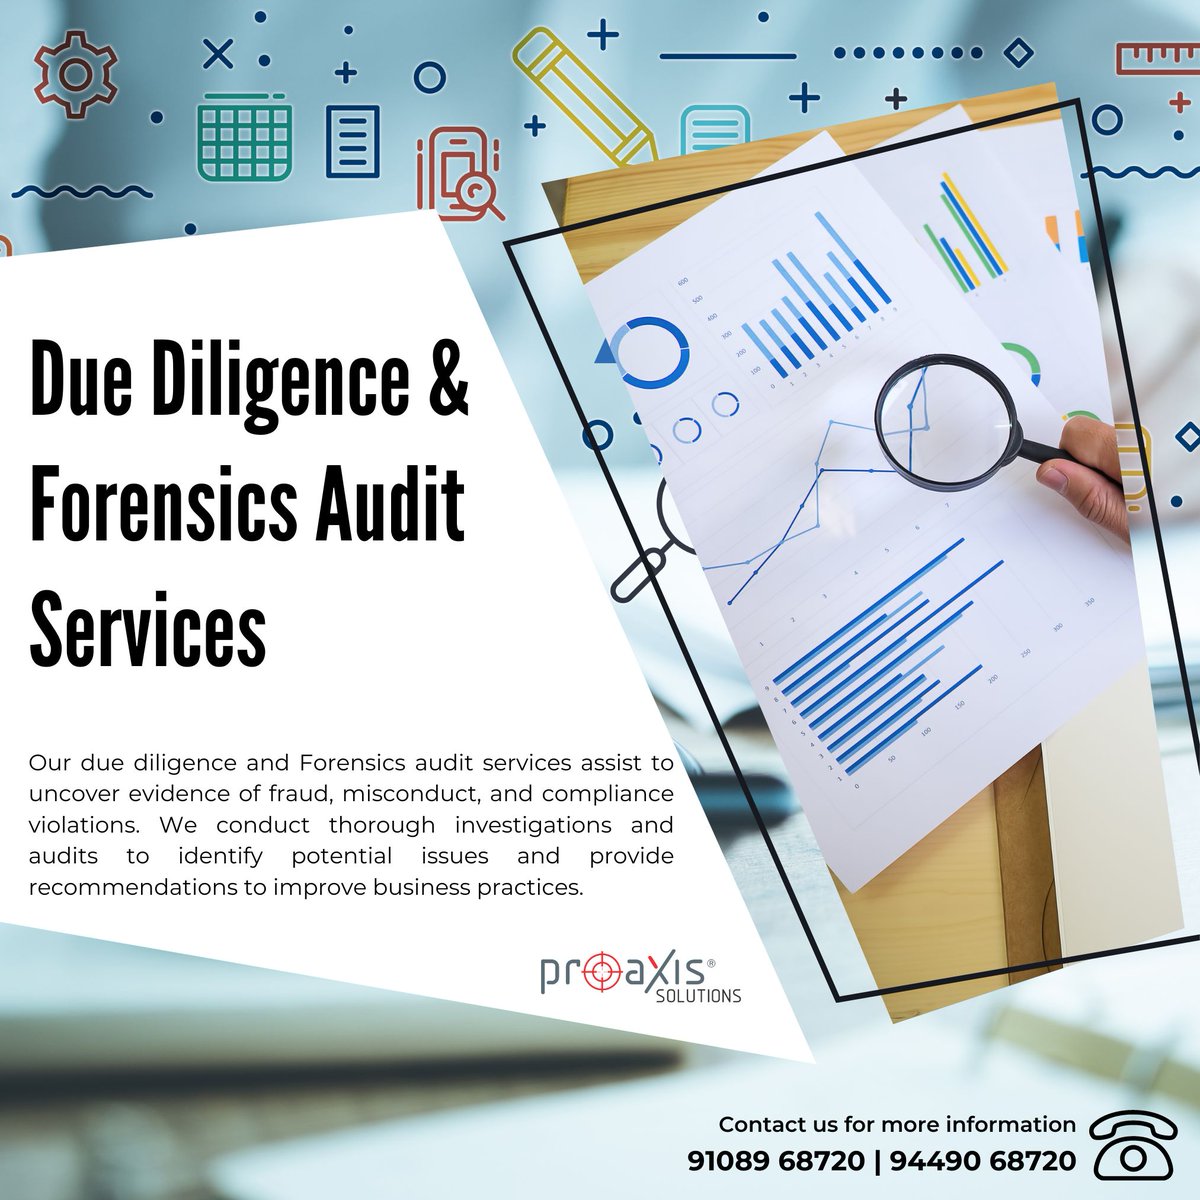 🔍 Discover the Truth: Due Diligence & Forensic Audits 
Unearth hidden risks decode financial mysteries.

Protect your assets. 💼🔐

For more info,

visit us: proaxissolutions.com/forensics

#forensicaudit #dnaforensics #forensics #cyberforensics #duediligence #proaxissolutions